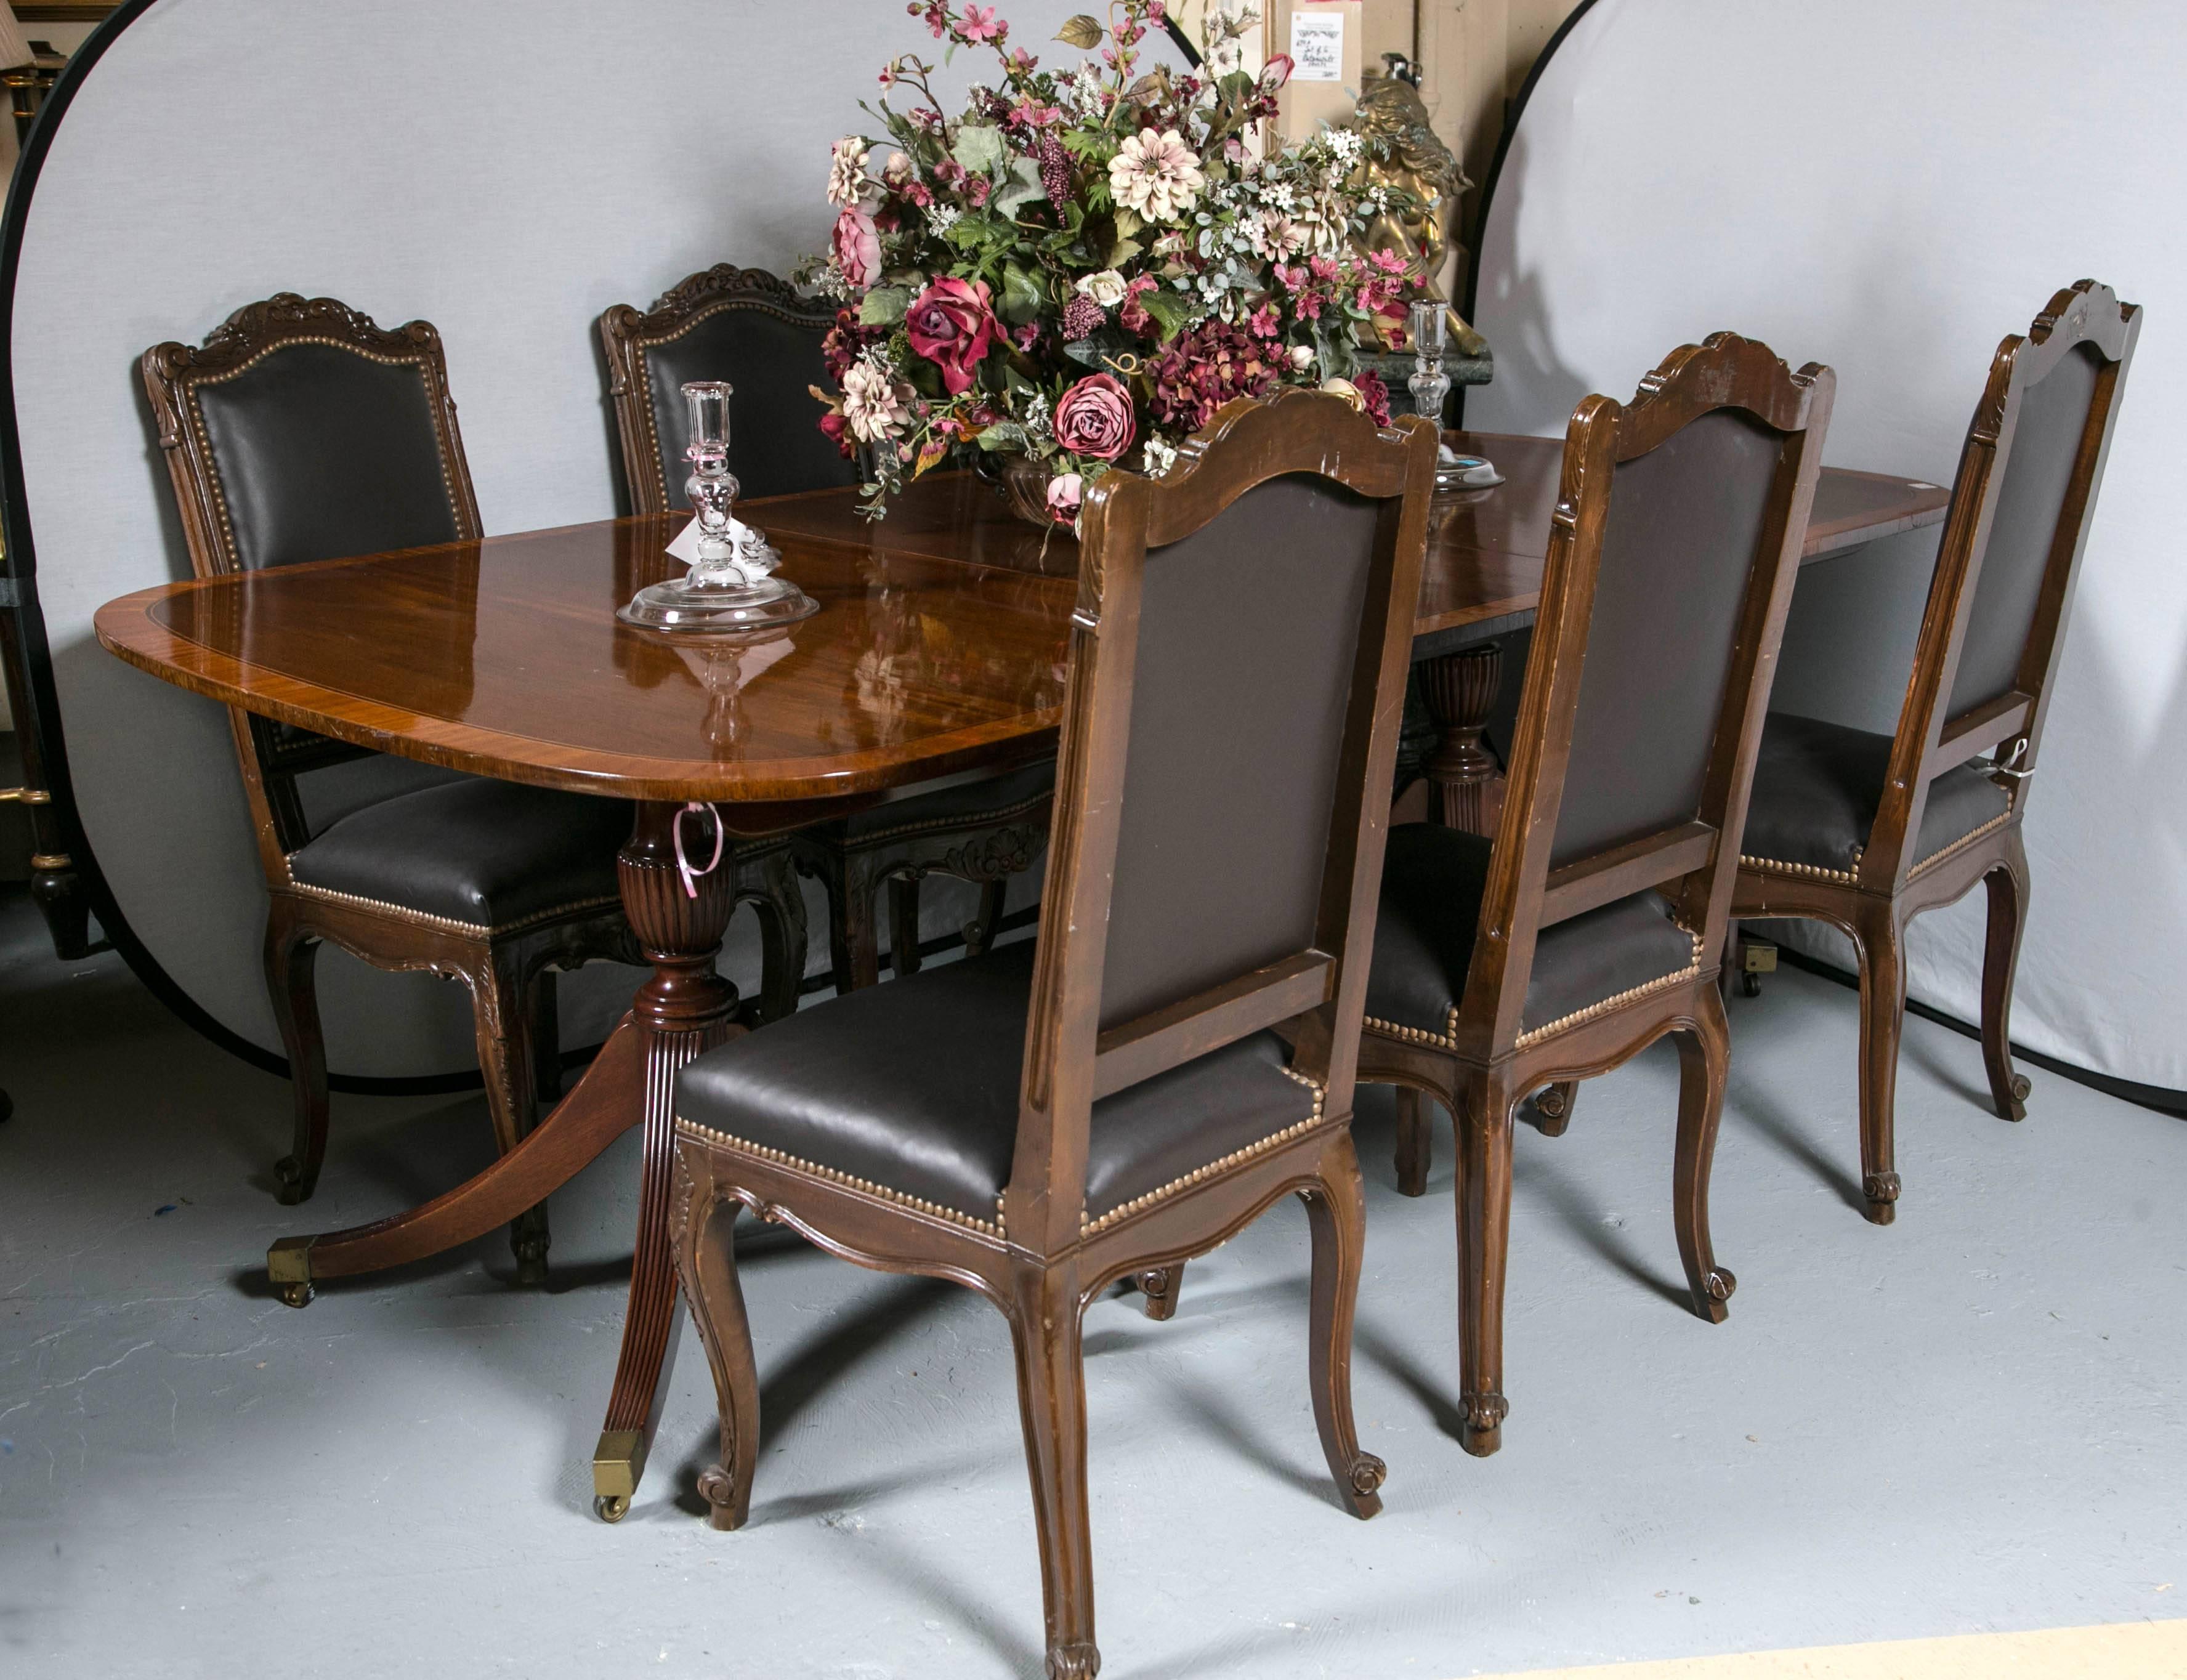 Baker Furniture Company dining table. This finely satinwood inlaid banded dining table has two 17.5